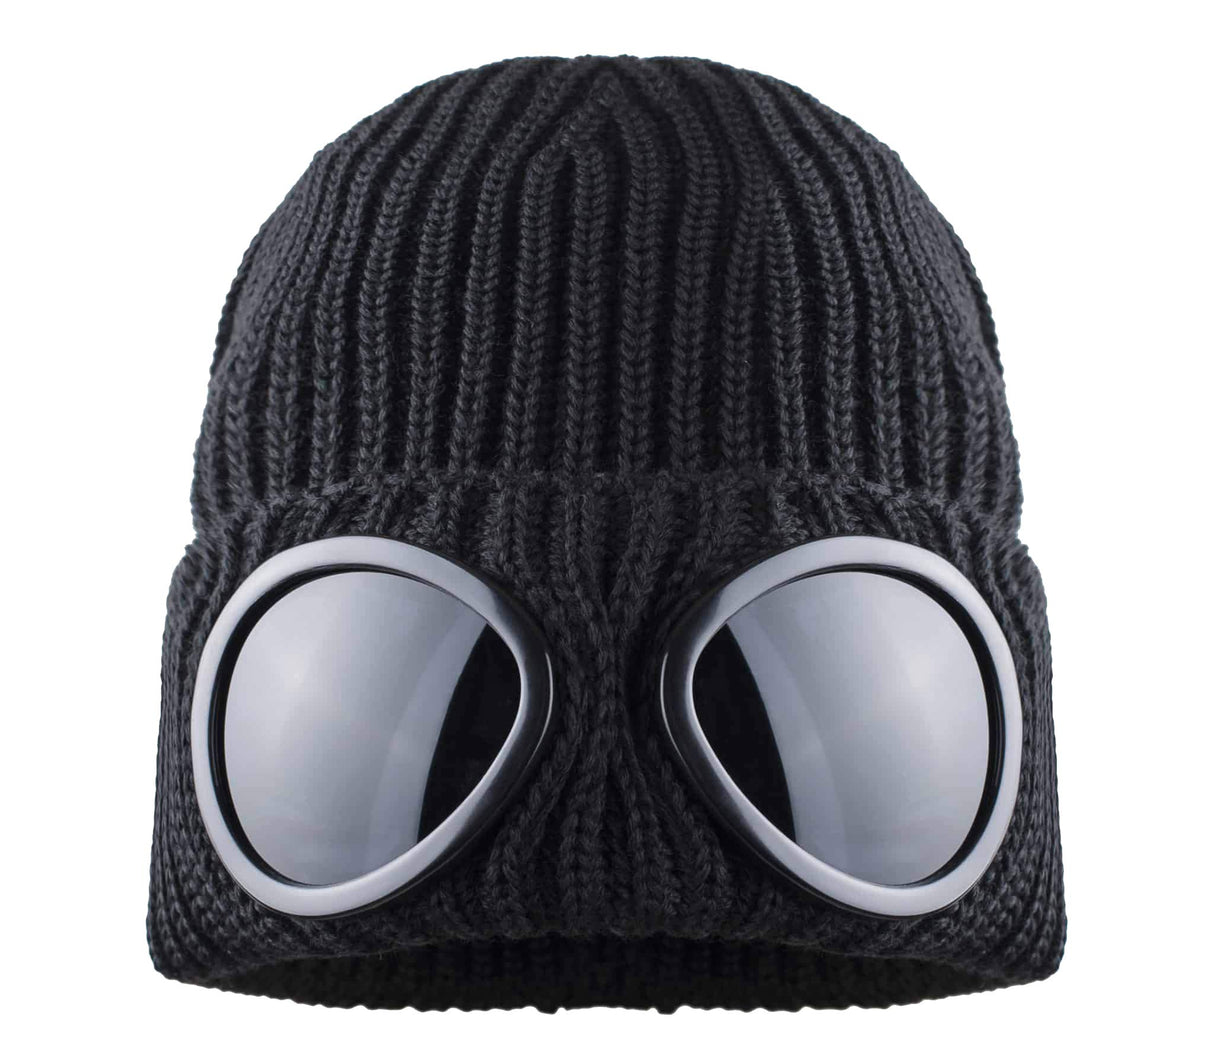 BIGFOOT Goggle Hat, Beanie Style with Ribbed Knit Cuff for Winter - Unisex Black